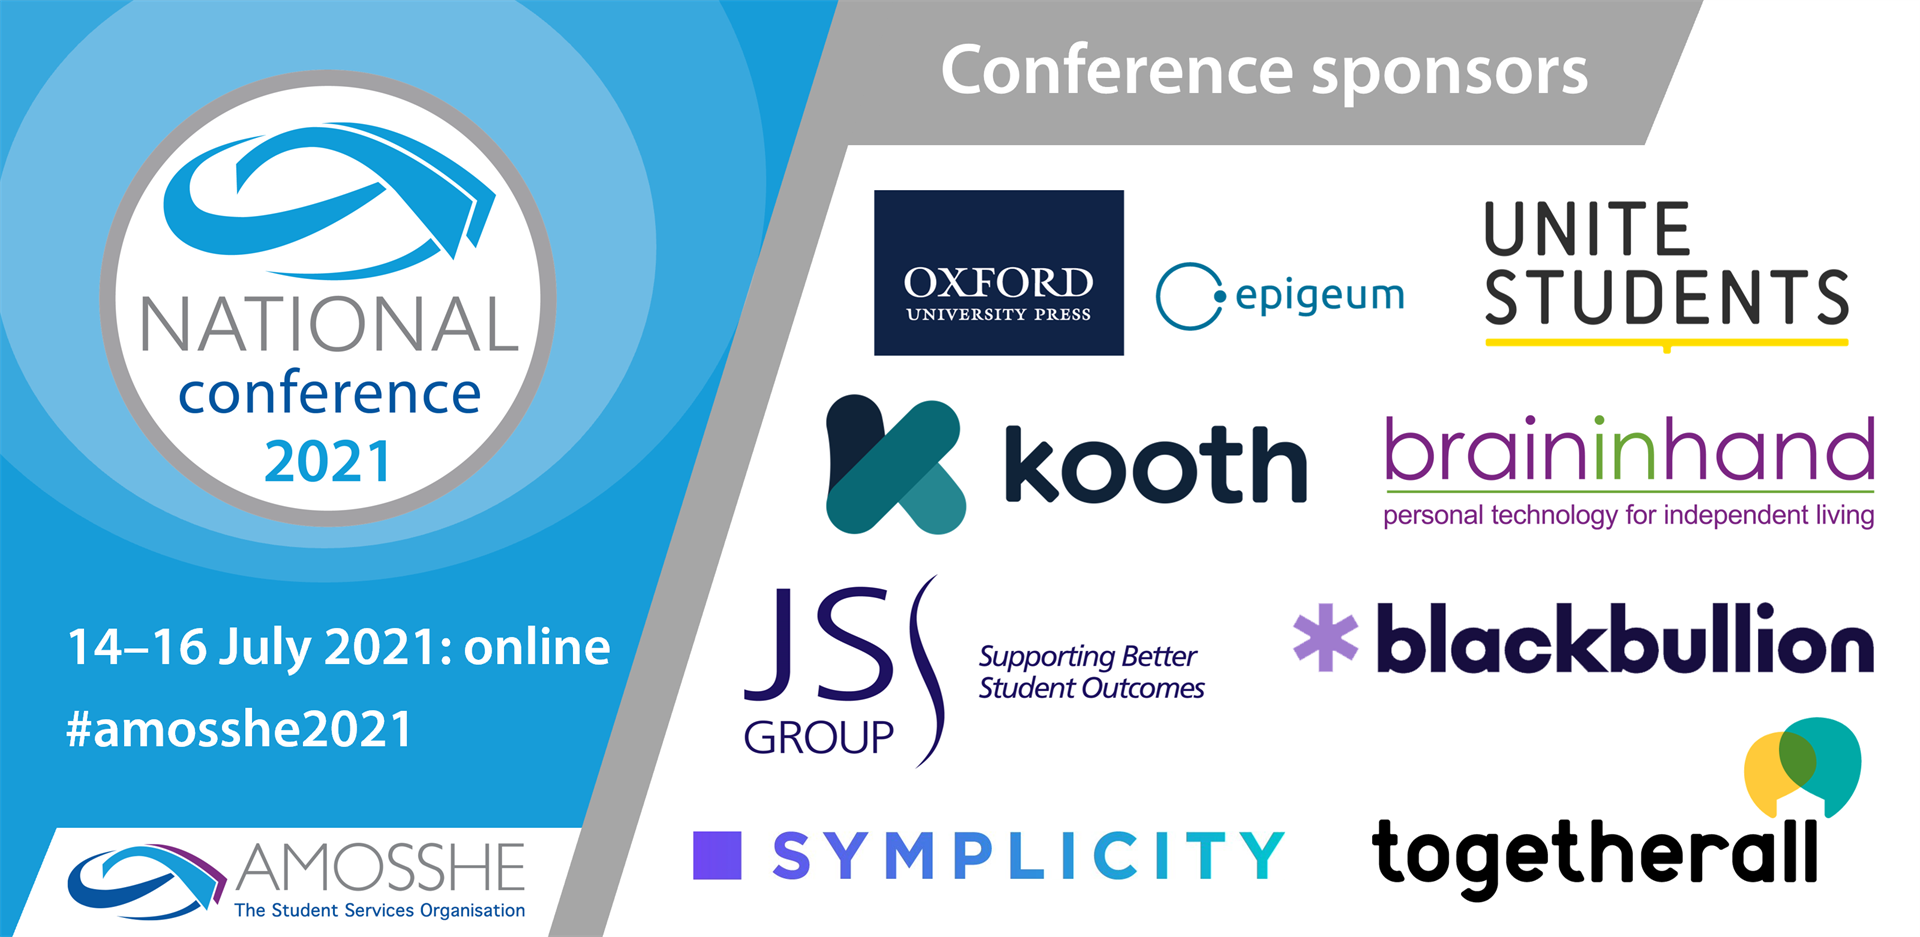 Conference sponsors (opens in a new window)